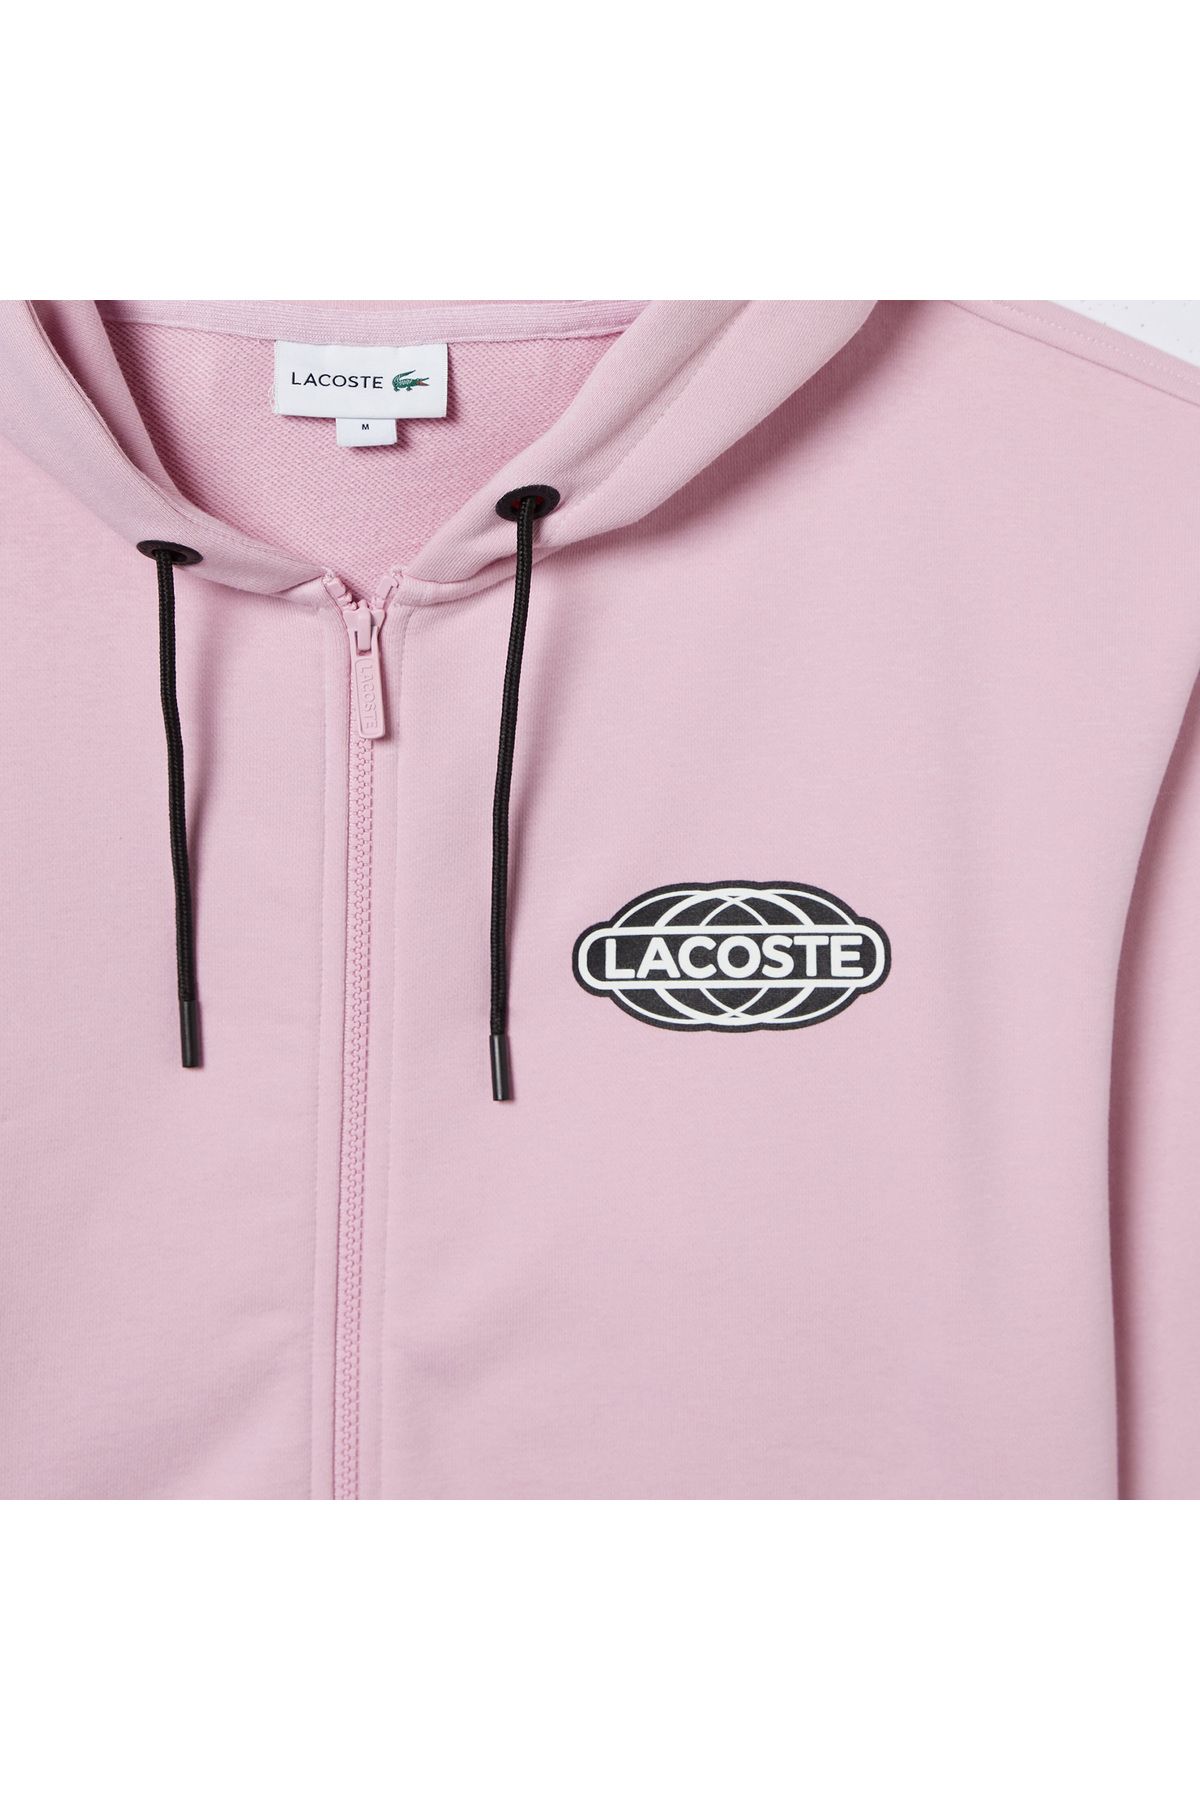 Lacoste House of Superstep X LaCoste Pink TrackSition